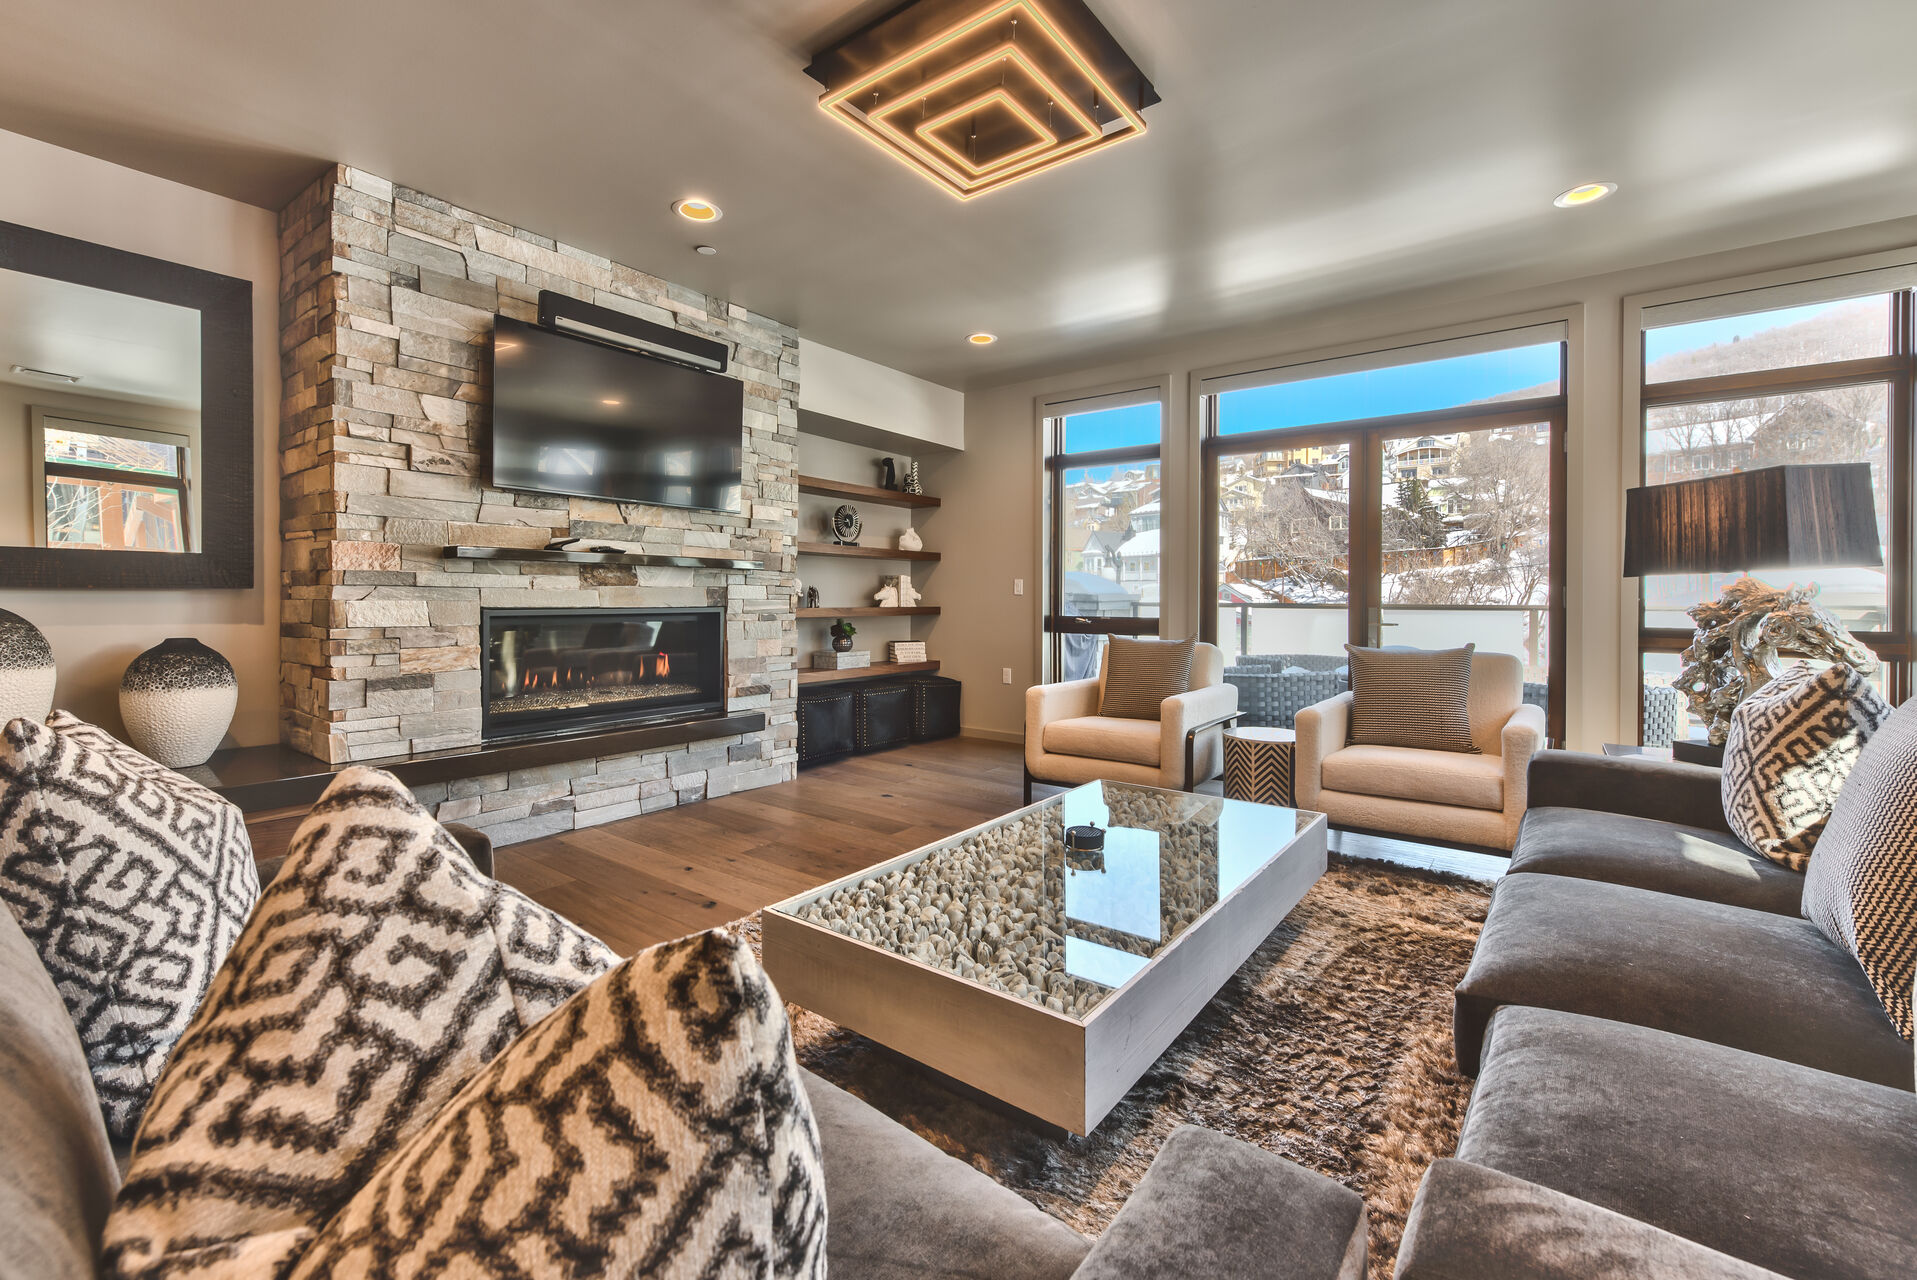 Living Room with TV and Fireplace in One of Our Condos for Rent in Park City, Utah.